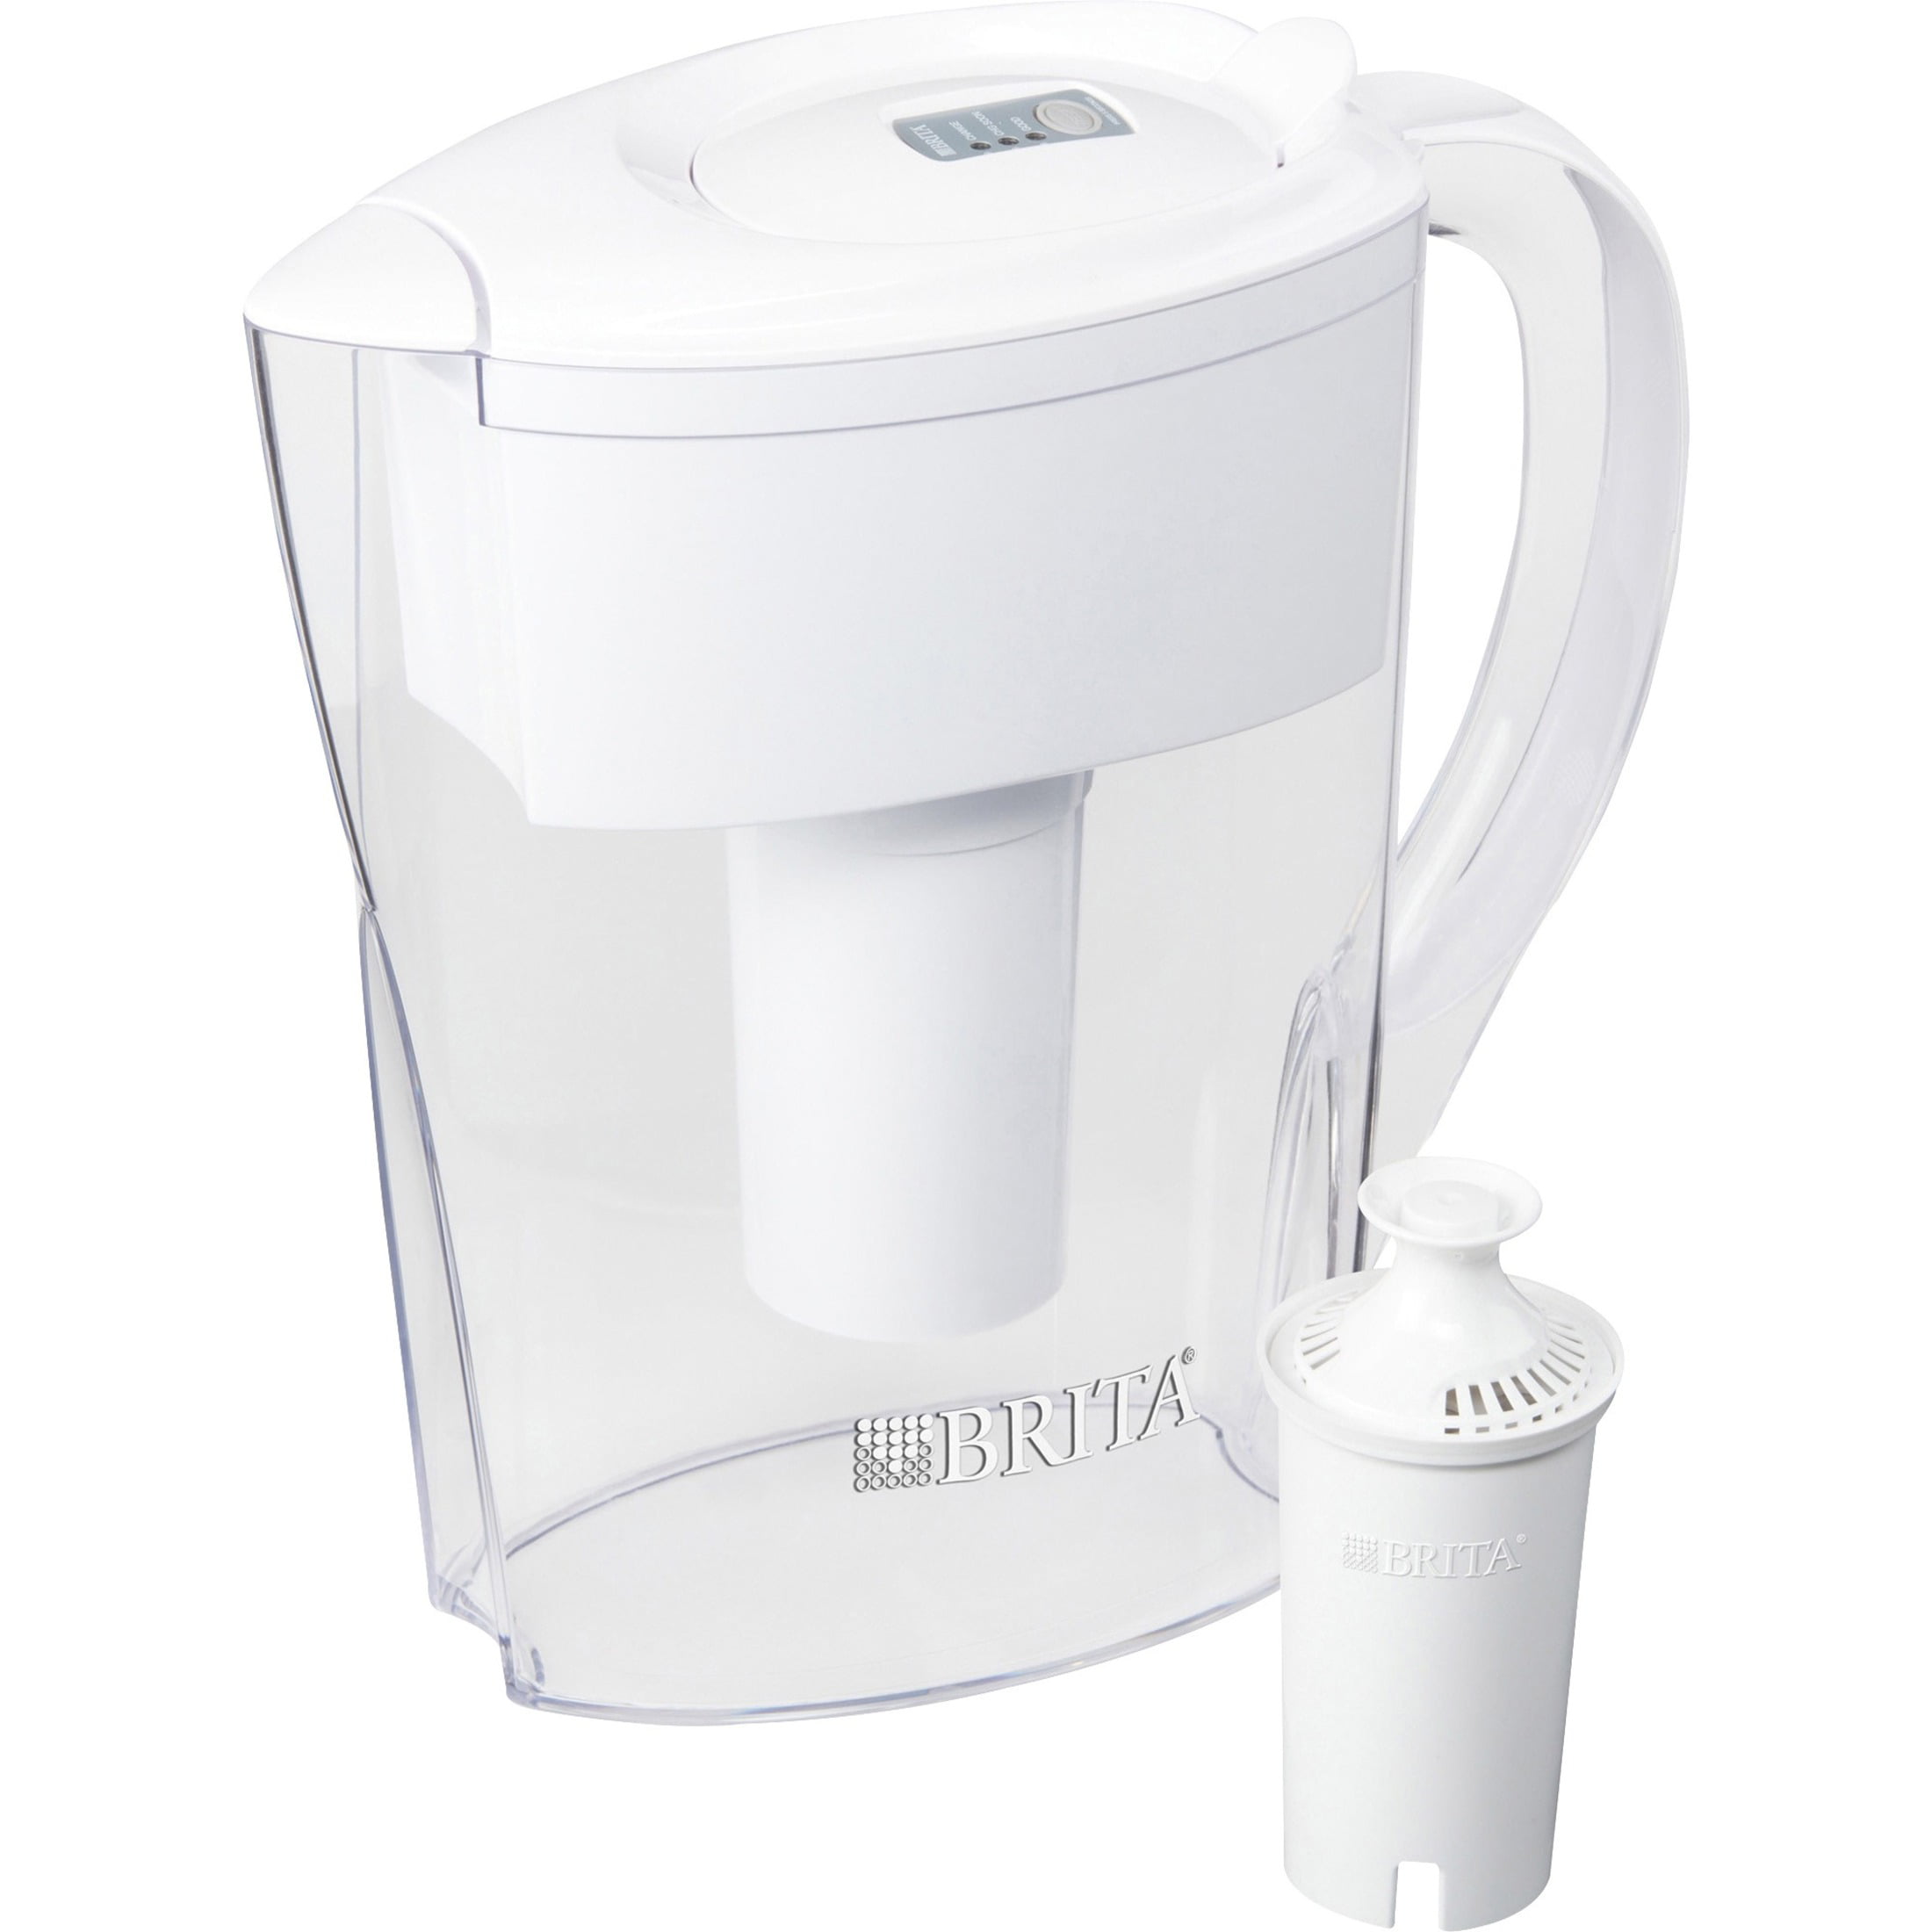 BRITA WATER FILTERATION PITCHER LAKE MODEL OB58/OB03 1 FILTER INCLUDED 